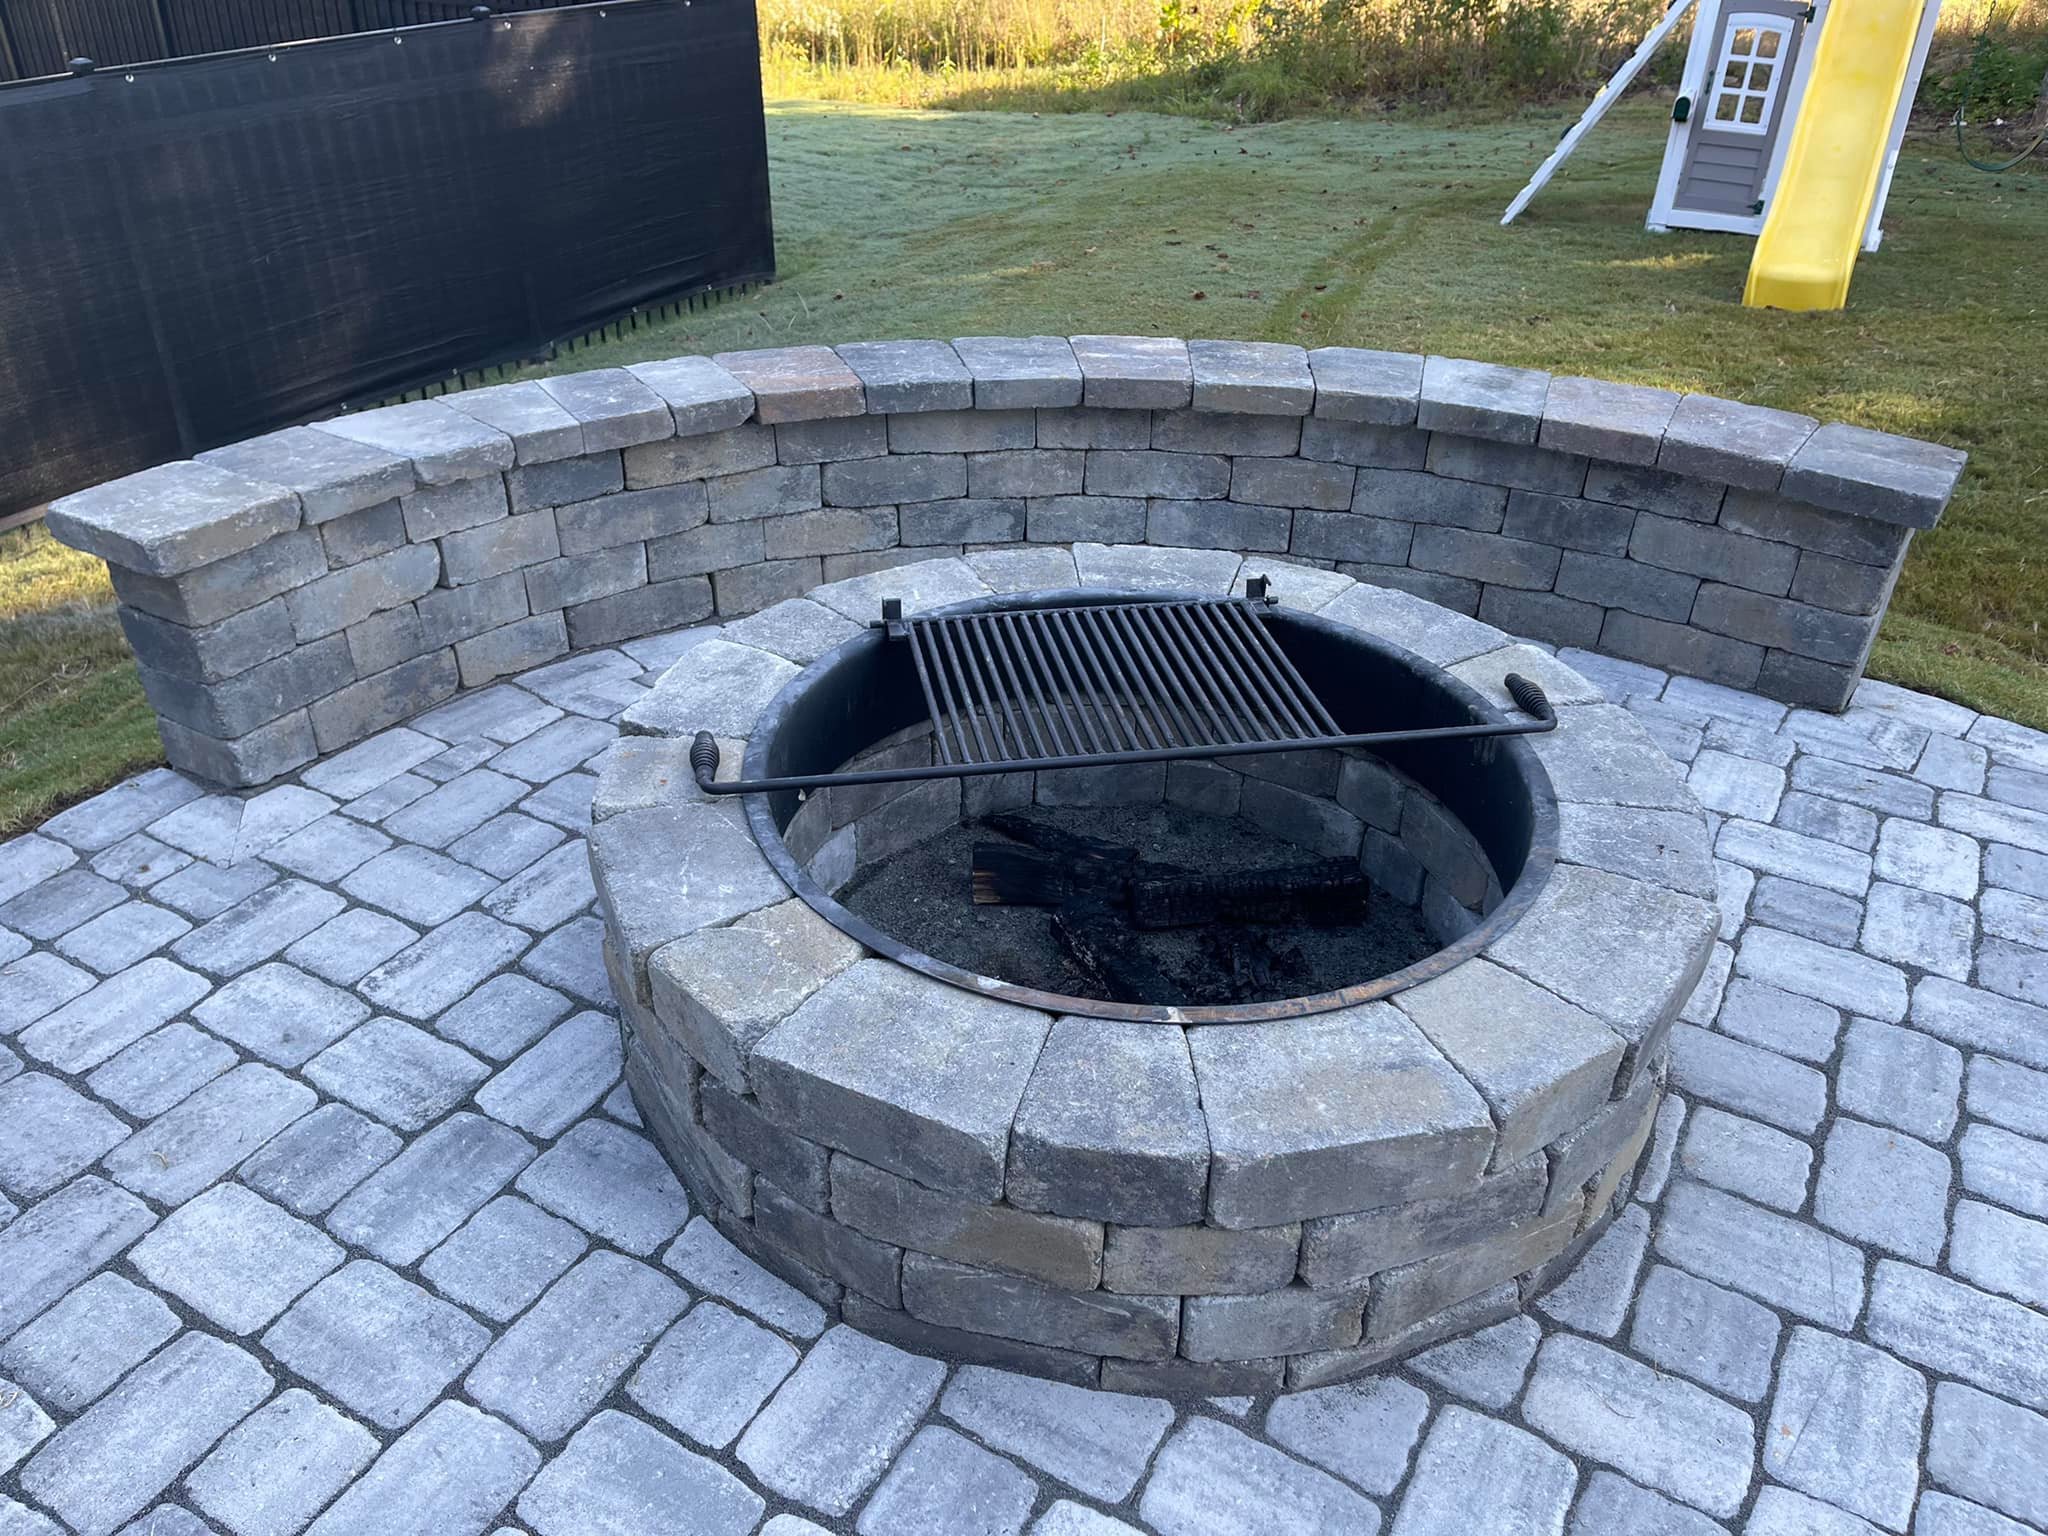 Belgard Arctic Cambridge Cobble Pavers – Outdoor Living Tip of the Day